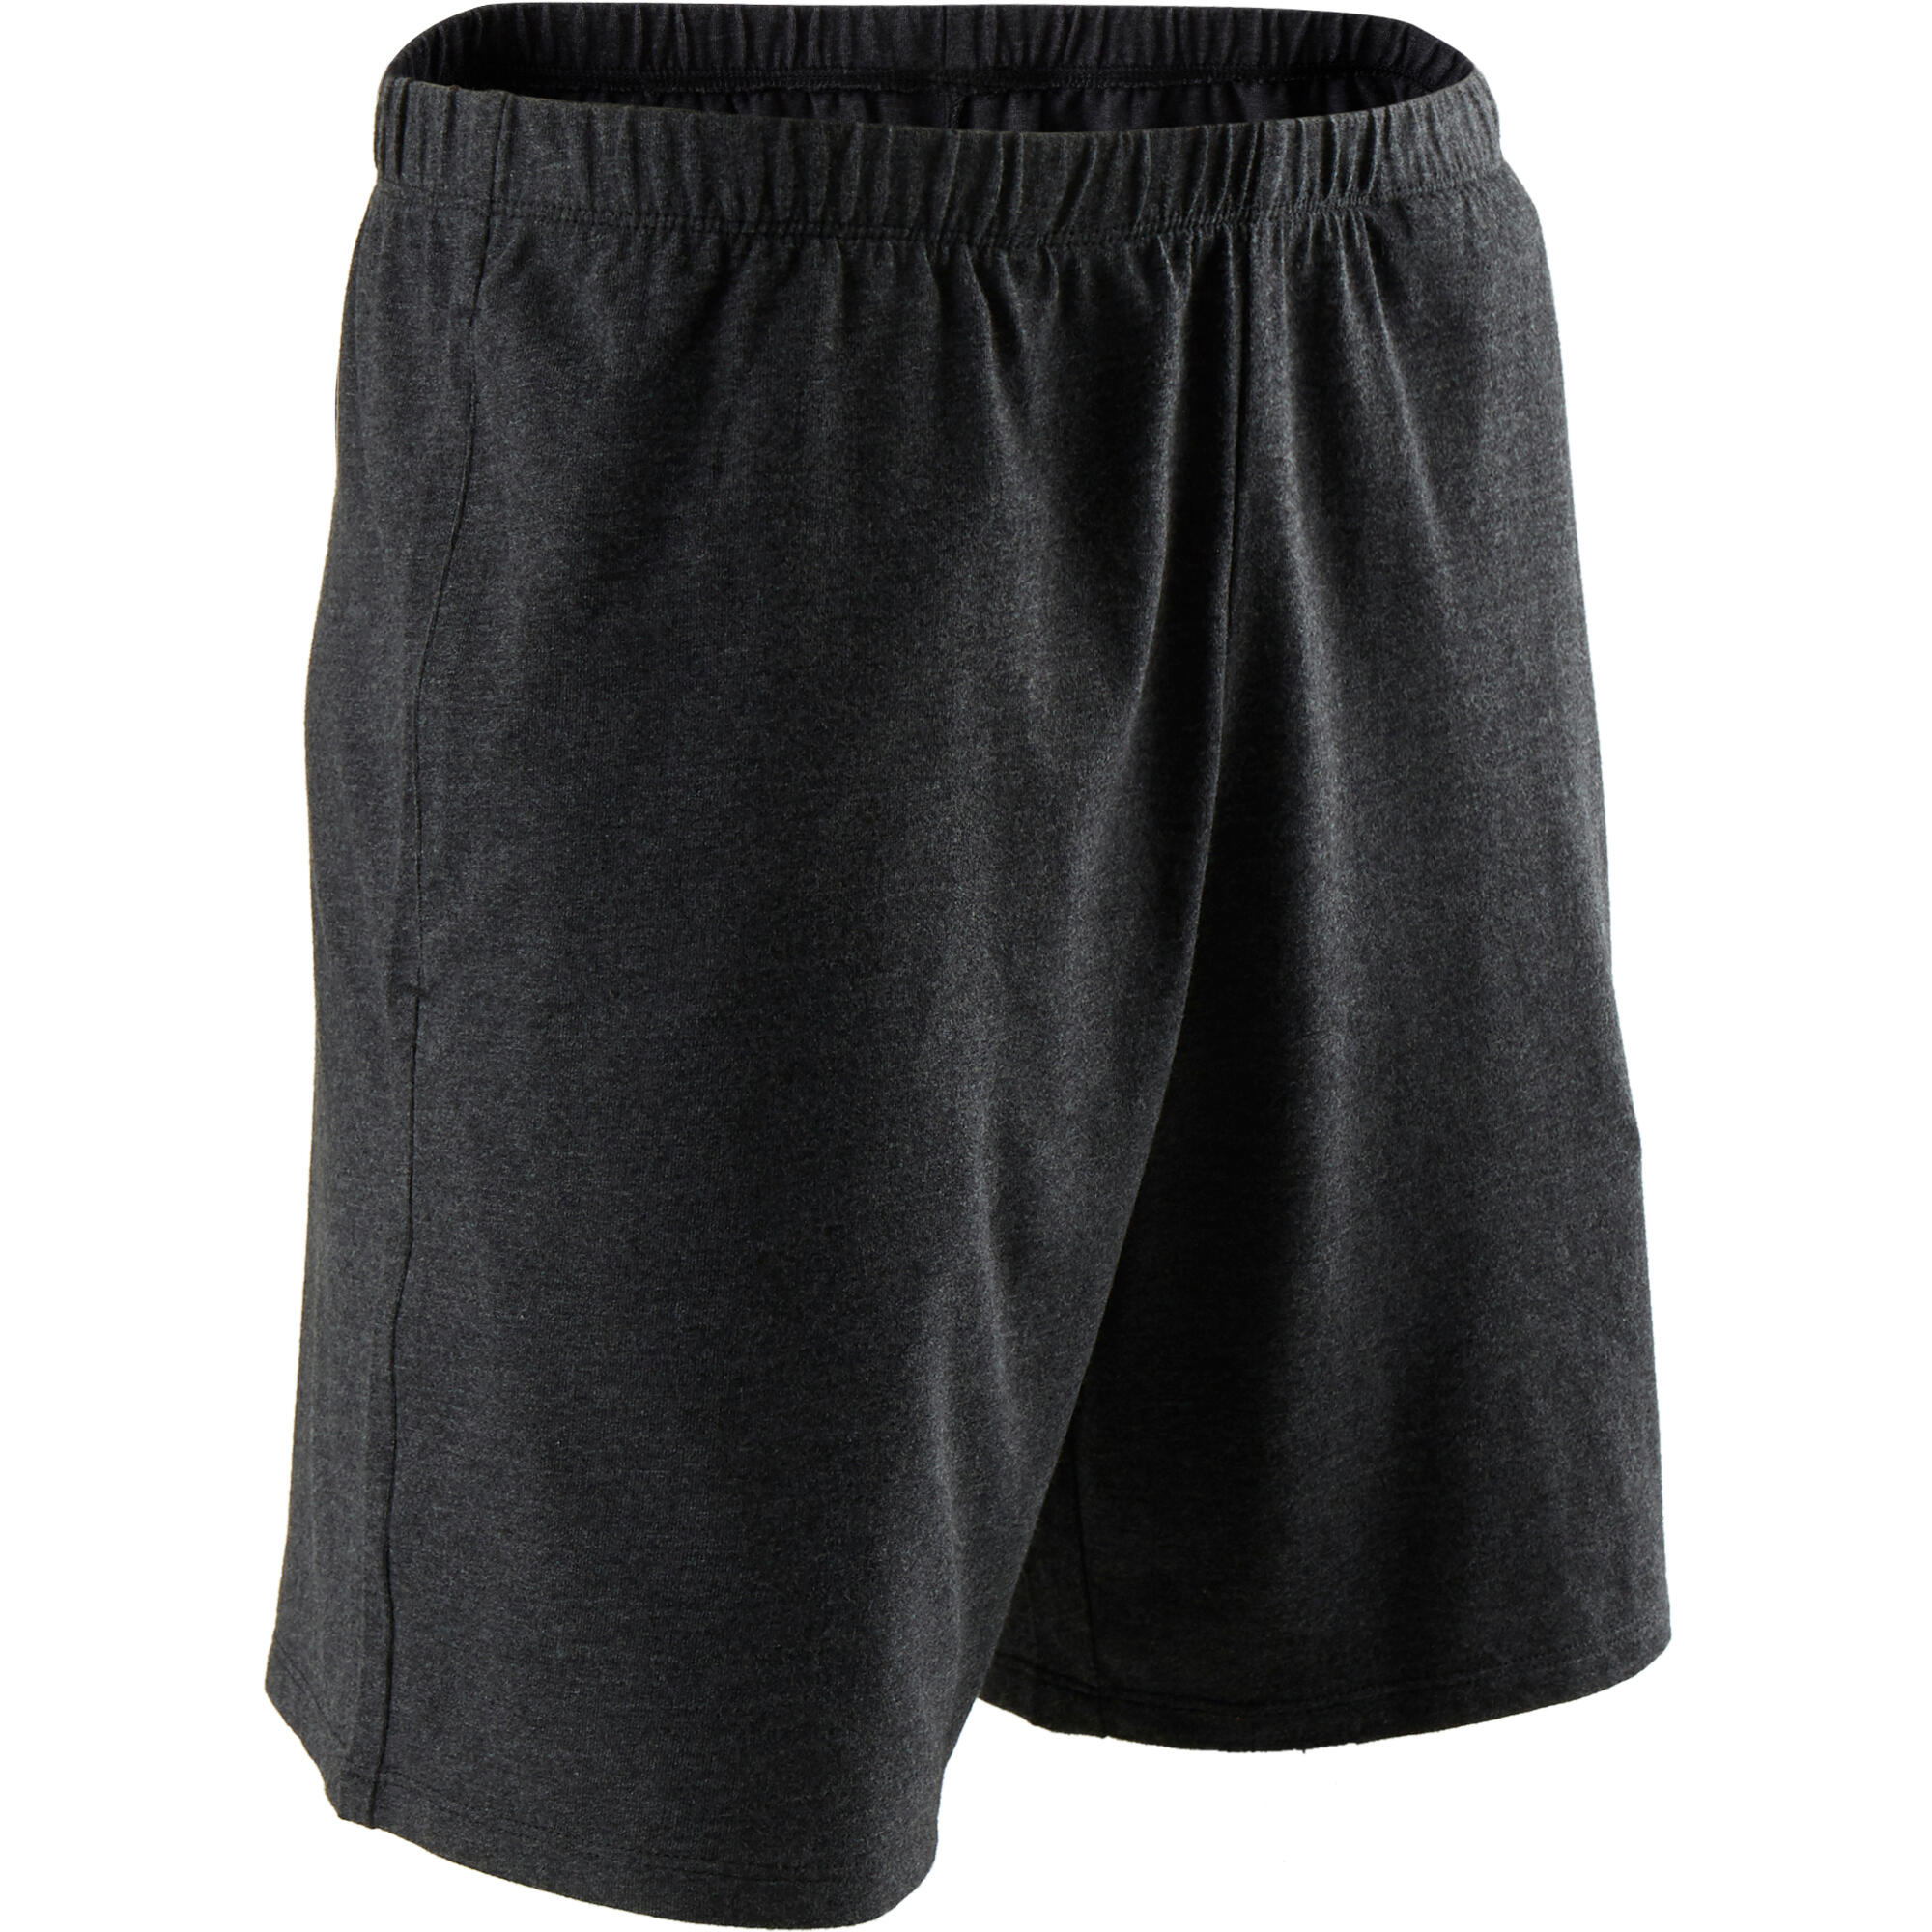 15 Minute Grey workout shorts for Women